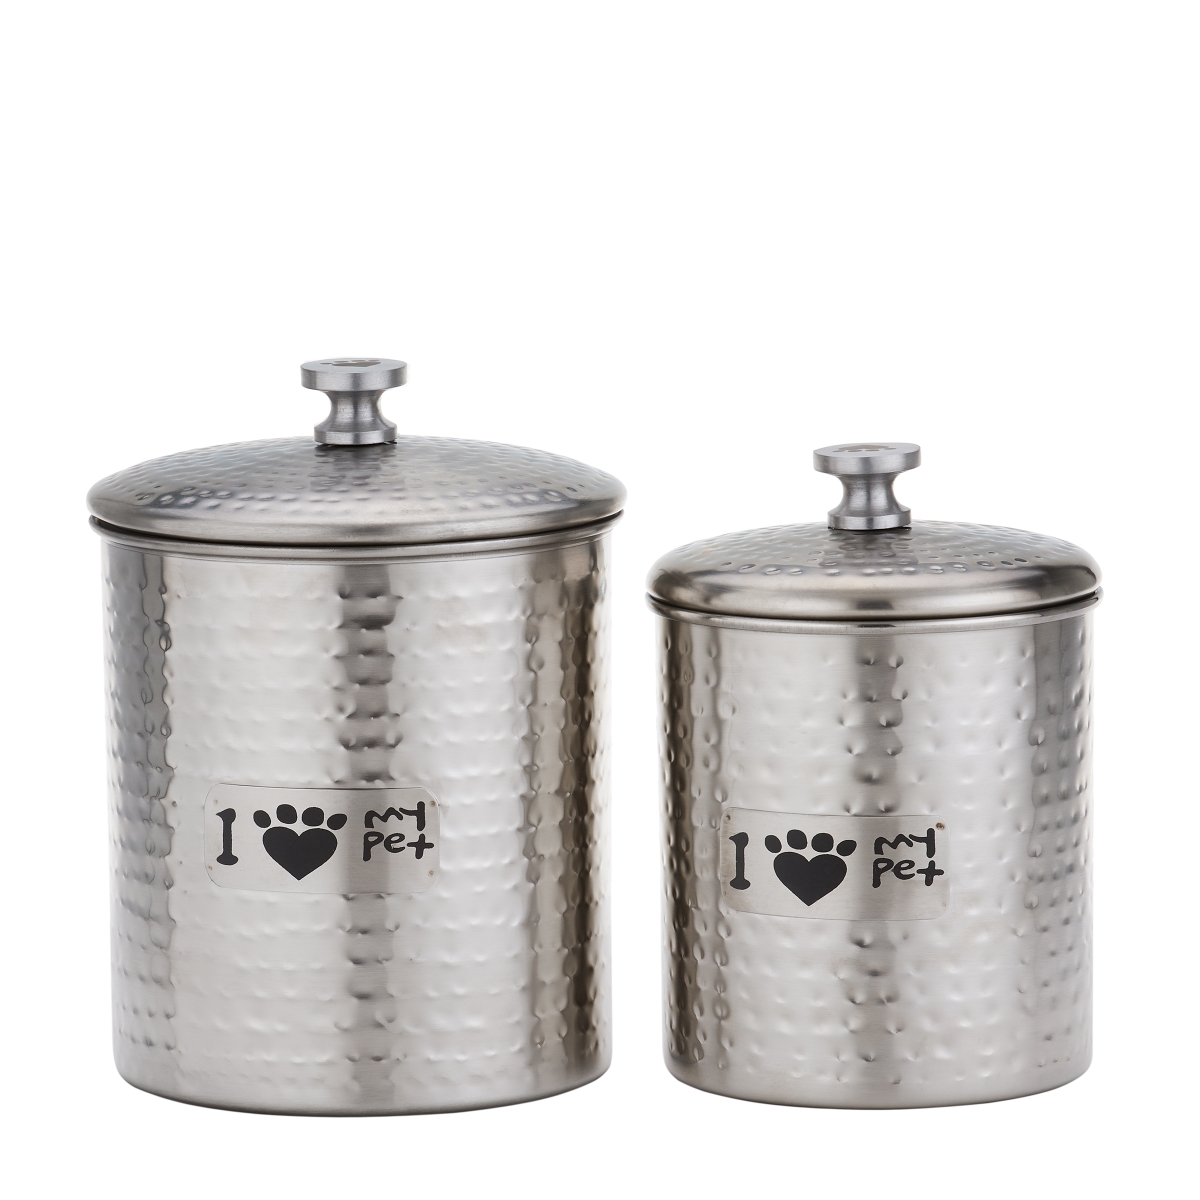 1444sn 3.75 & 2.5 Qt. Hammered Cat Paw Pet Canister Set, Satin Nickel - 2 Piece